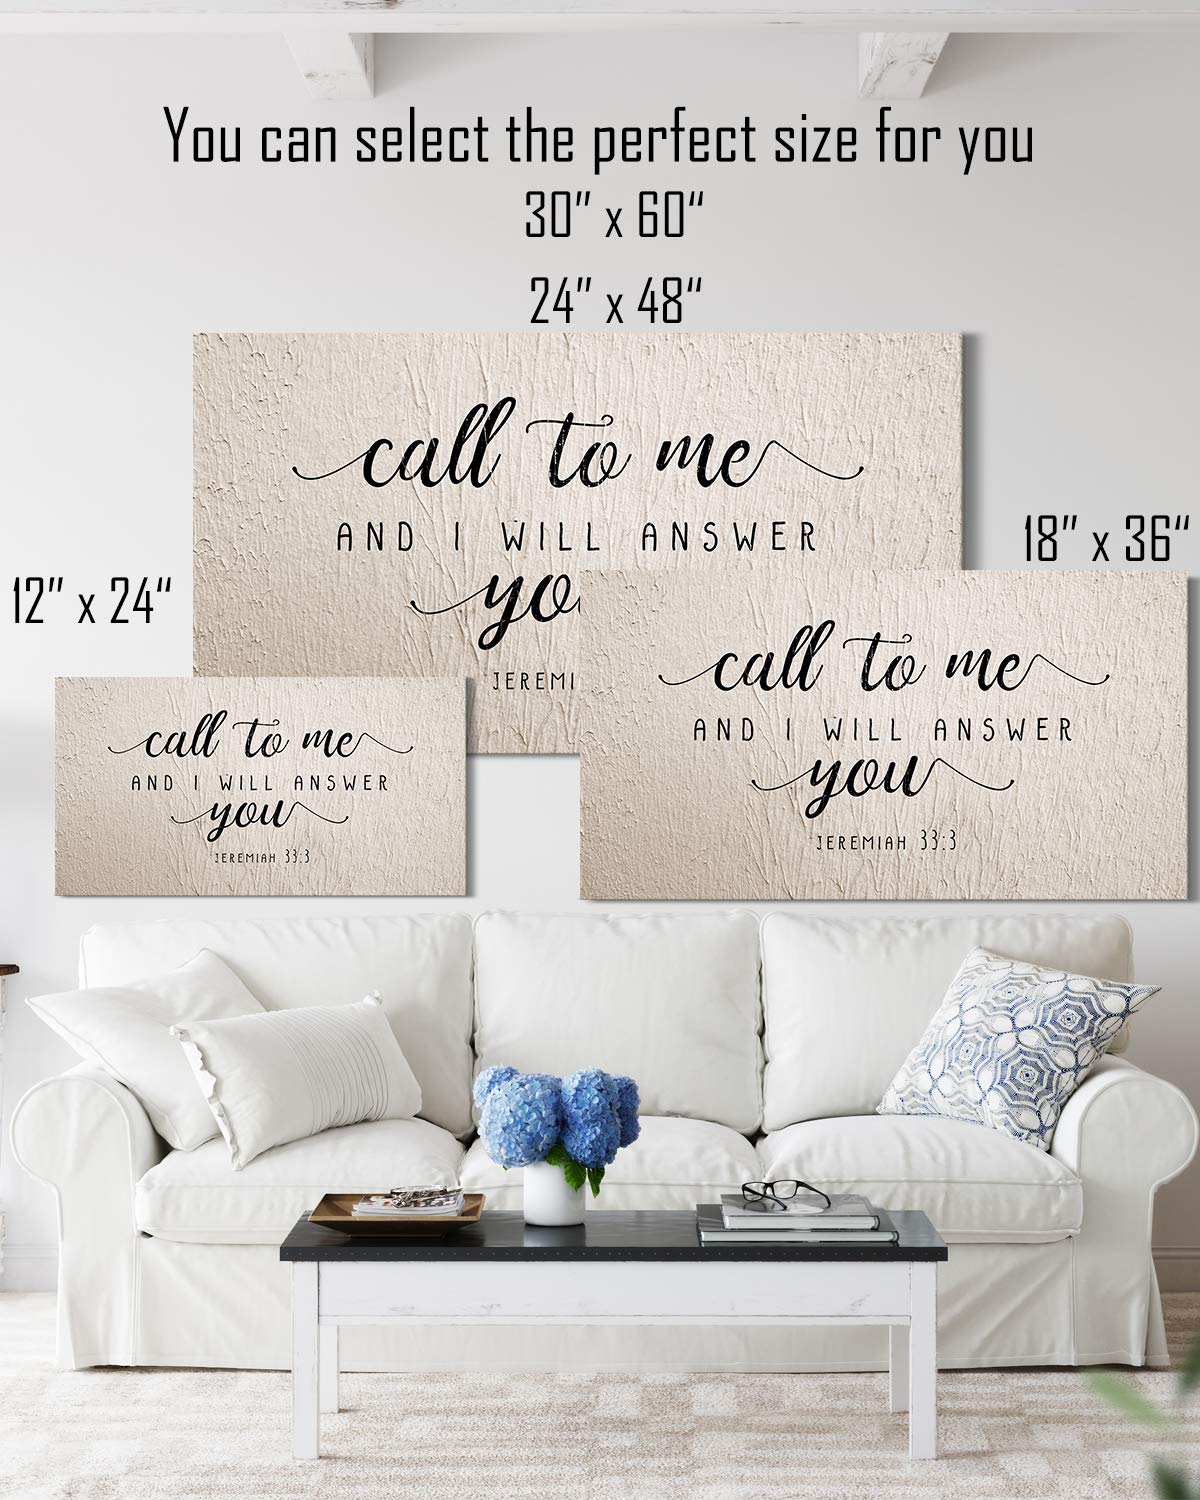 Call To Me and I Will Answer You Jeremiah 33:3 - Religious Wall Decor Art Canvas on Cream Background - Ready to Hang - Great for above a couch, table, bed or more